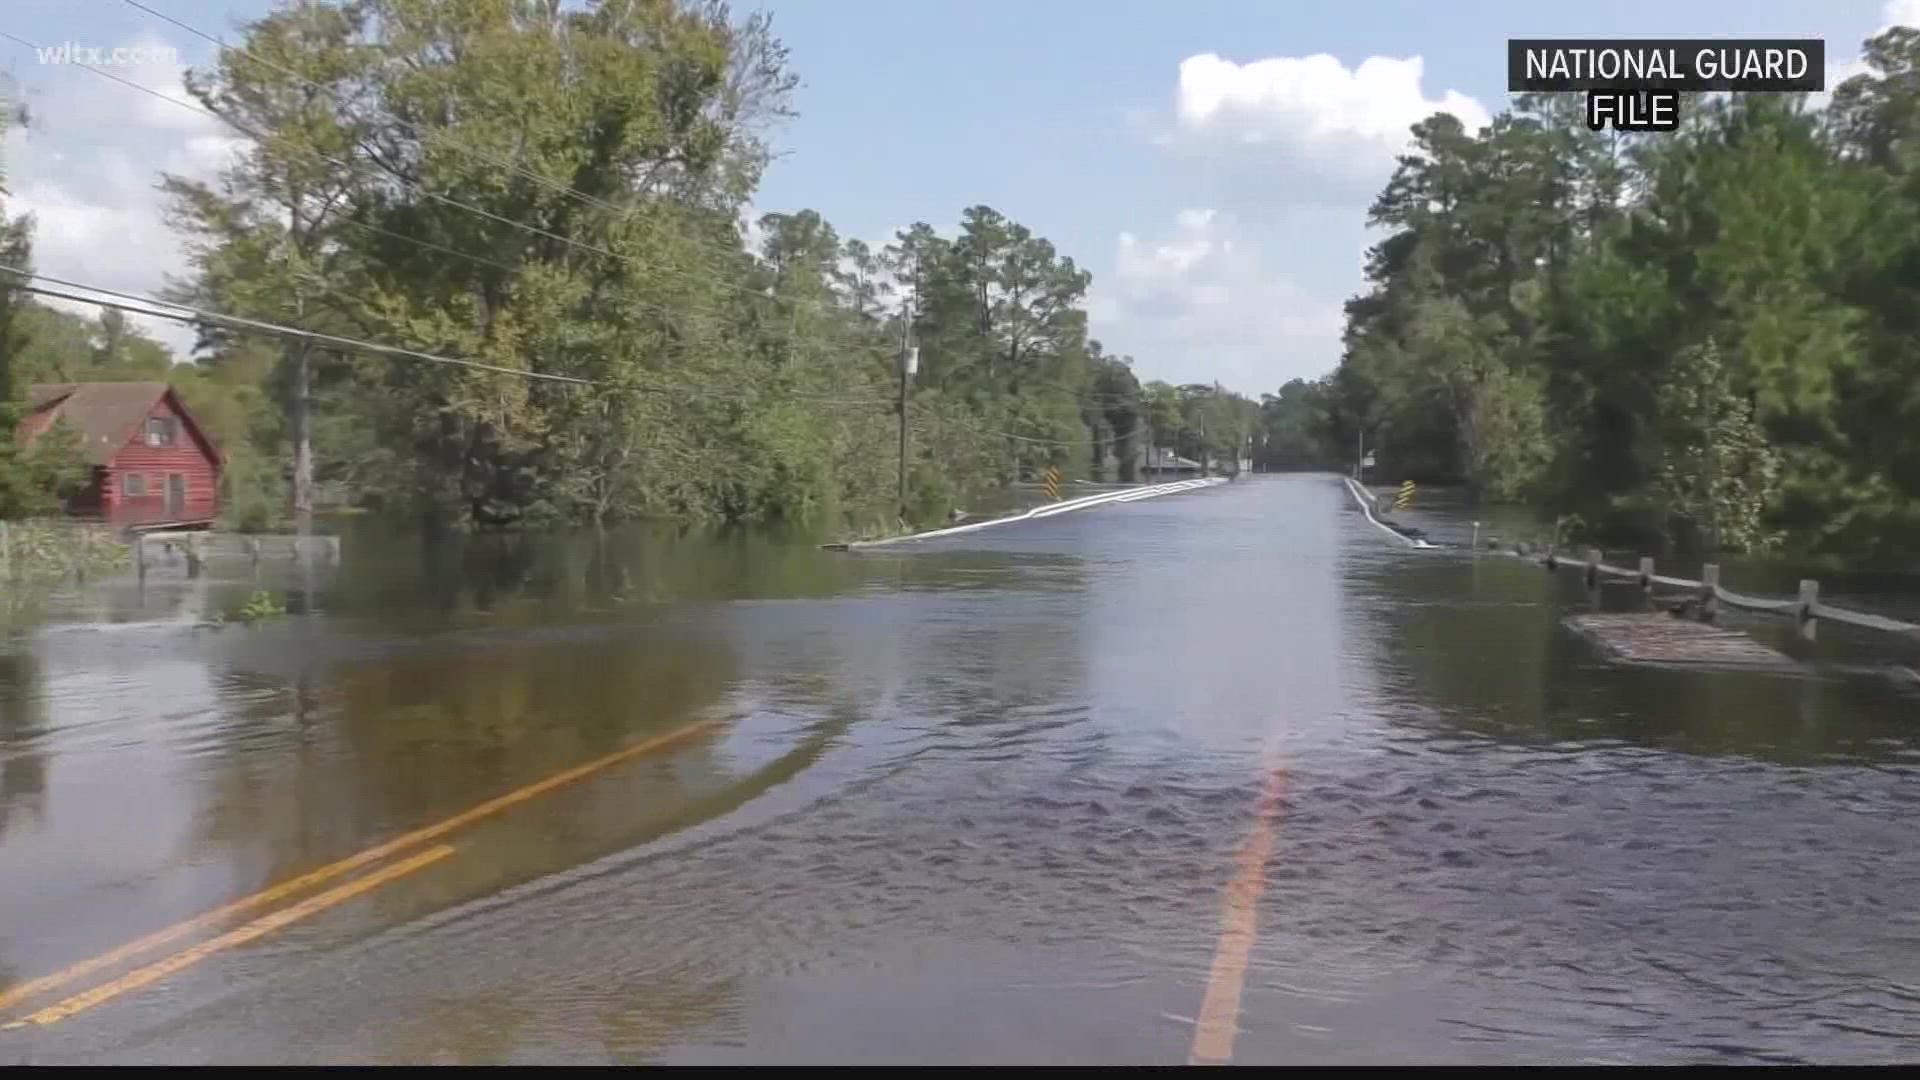 The Midlands of South Carolina see all types of flooding. This could increase thanks to climate change.